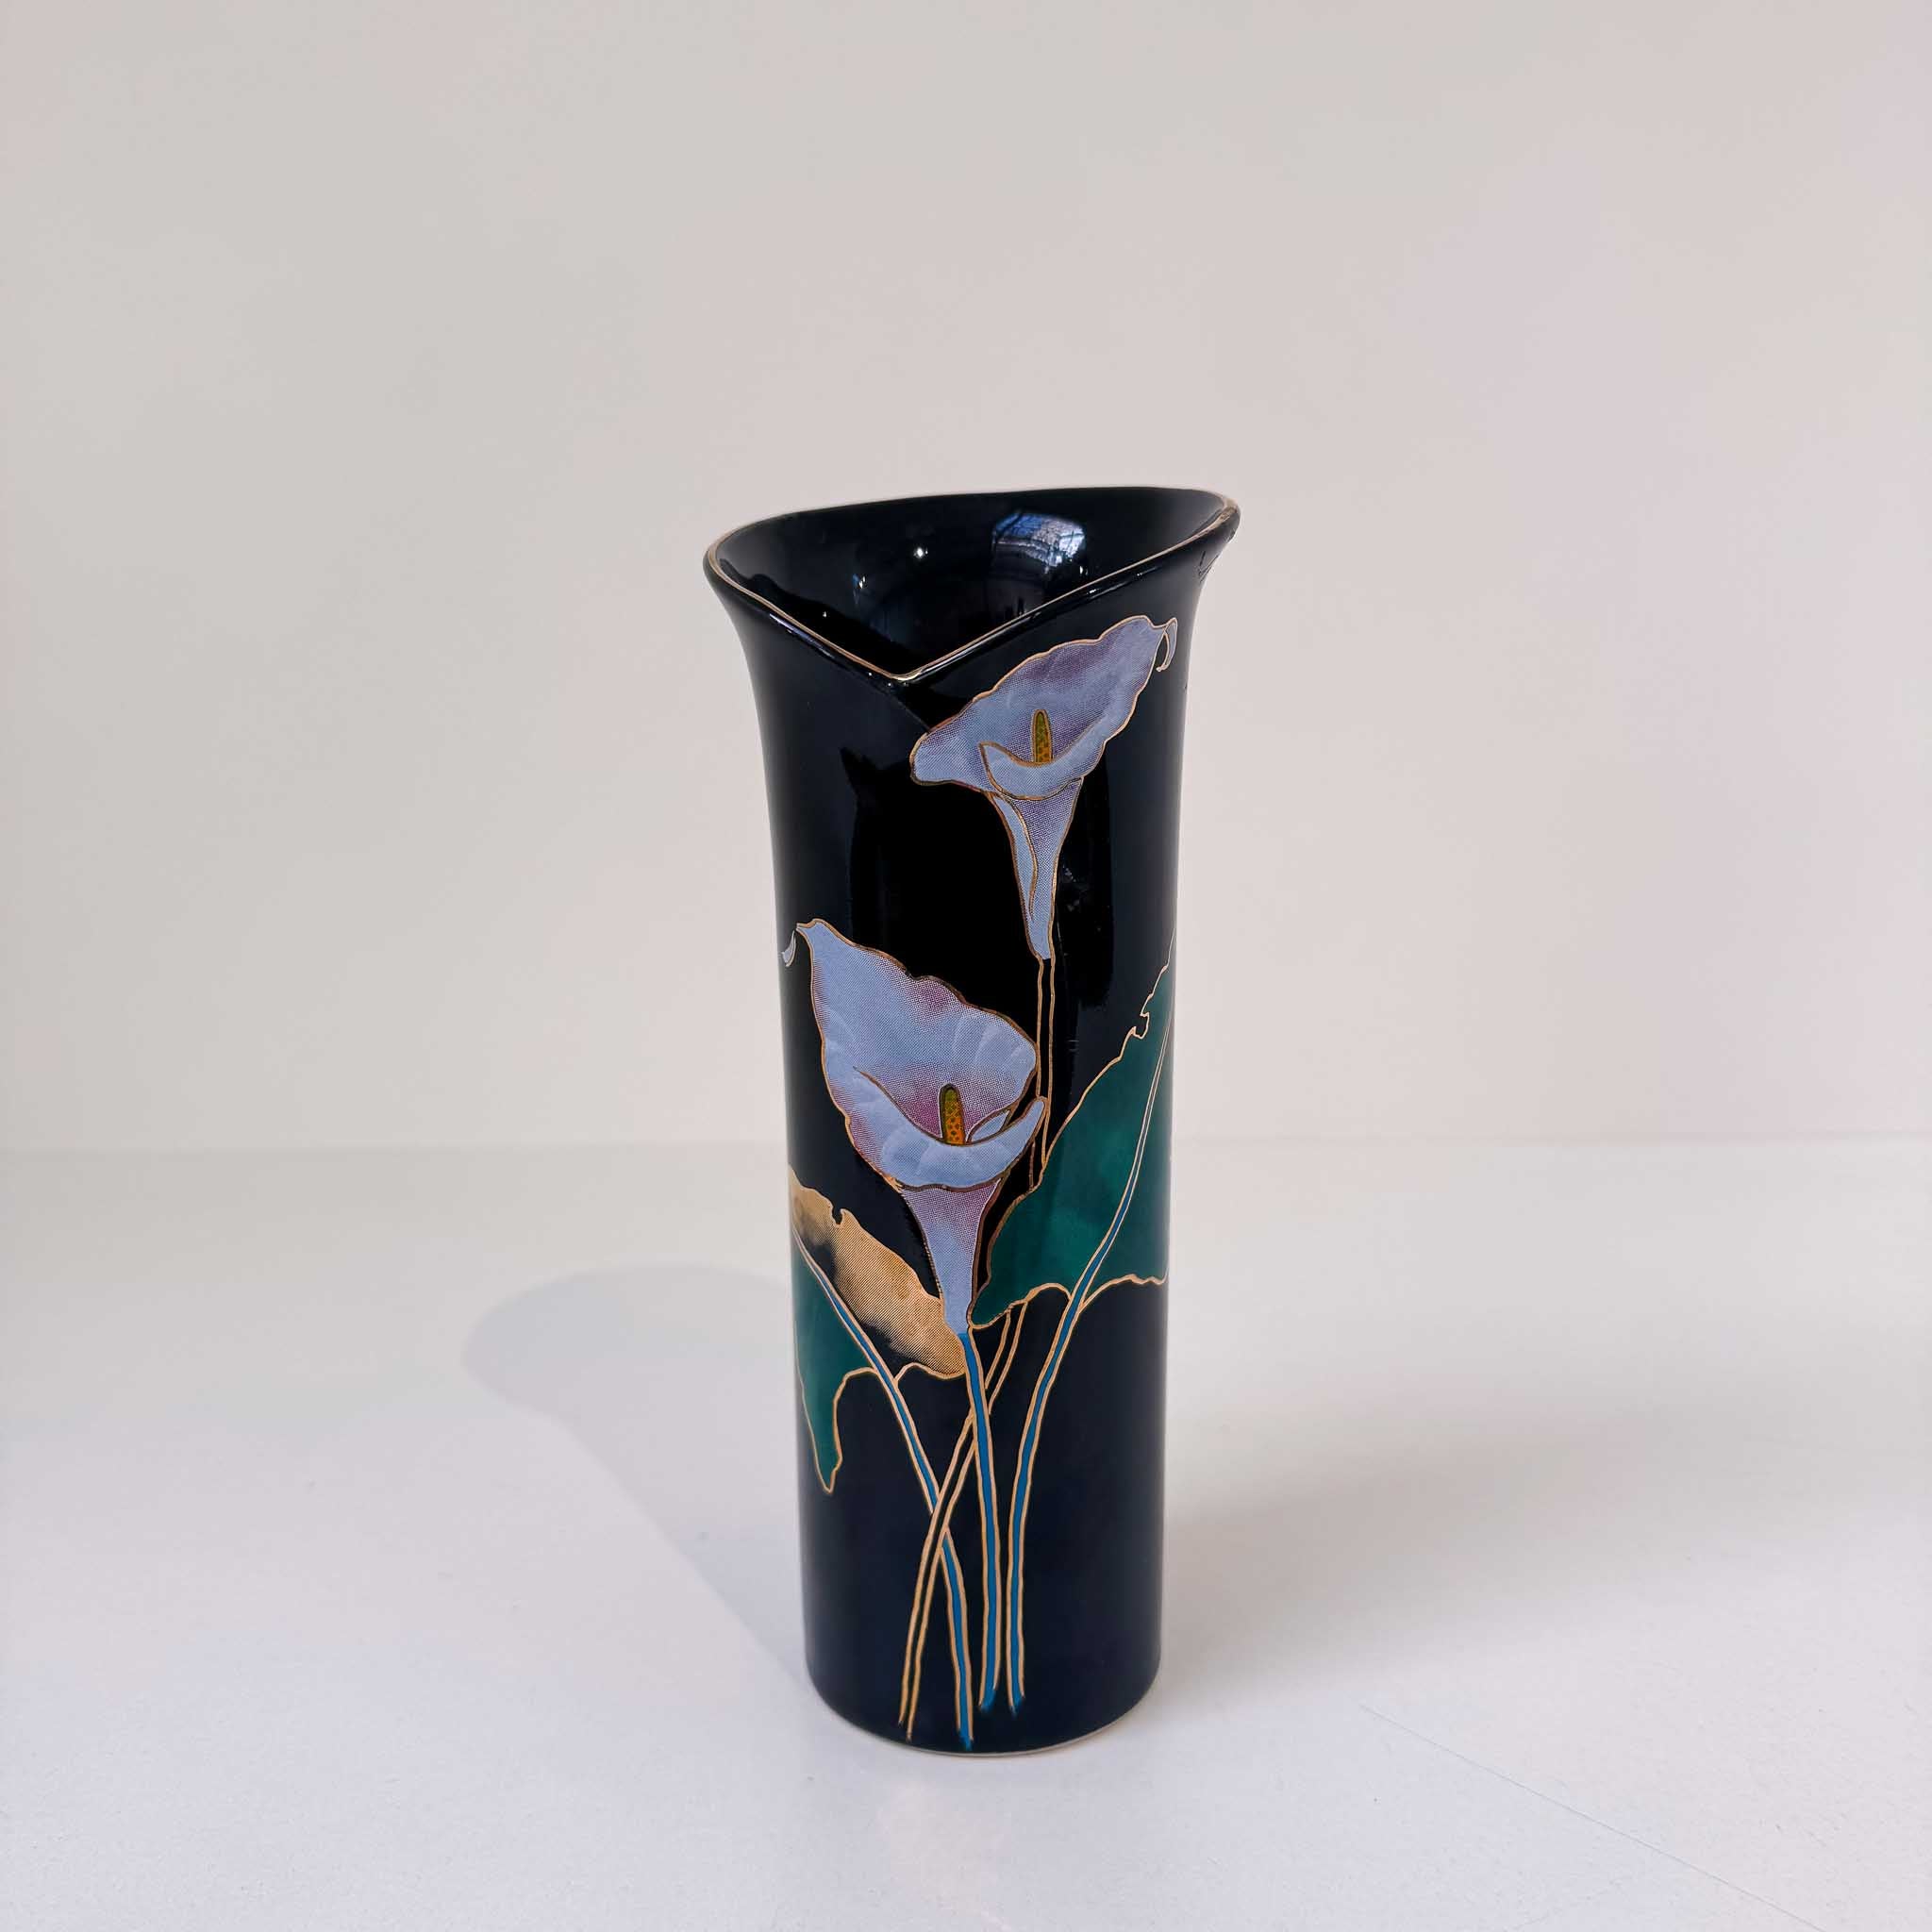 Vintage Japanese Hall Vase with Painted Lillies